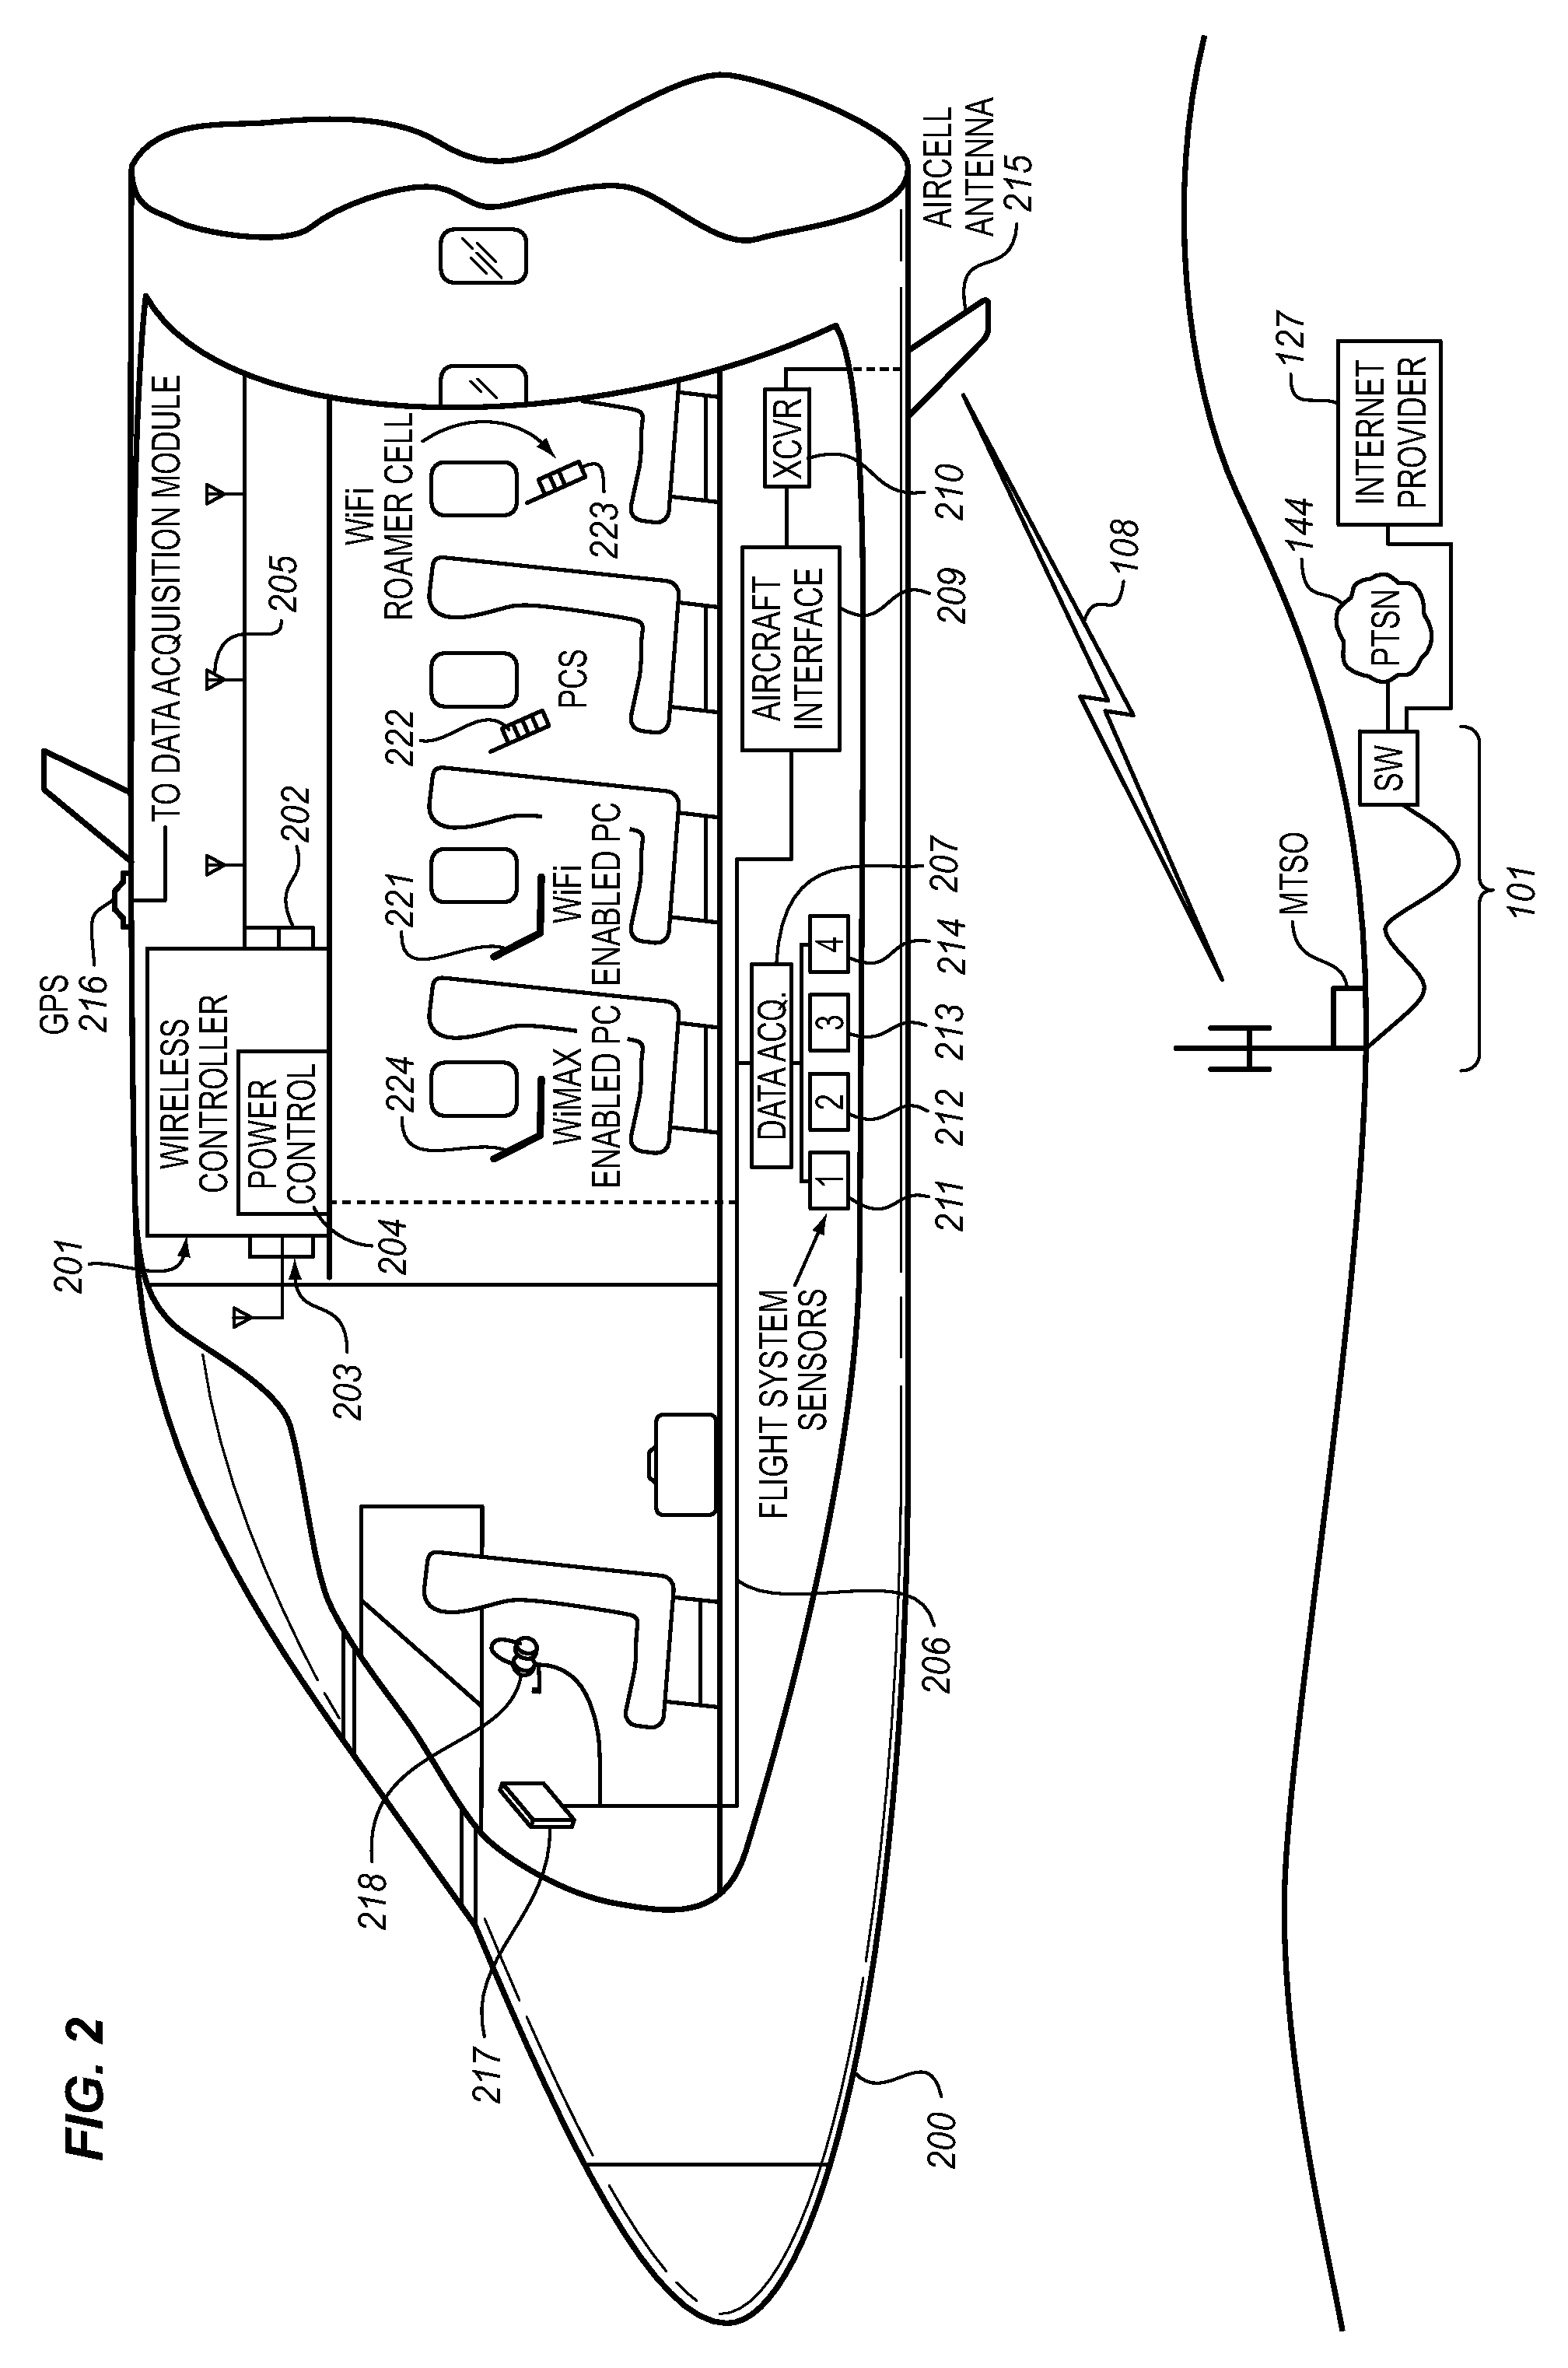 System for managing an aircraft-oriented emergency services call in an airborne wireless cellular network